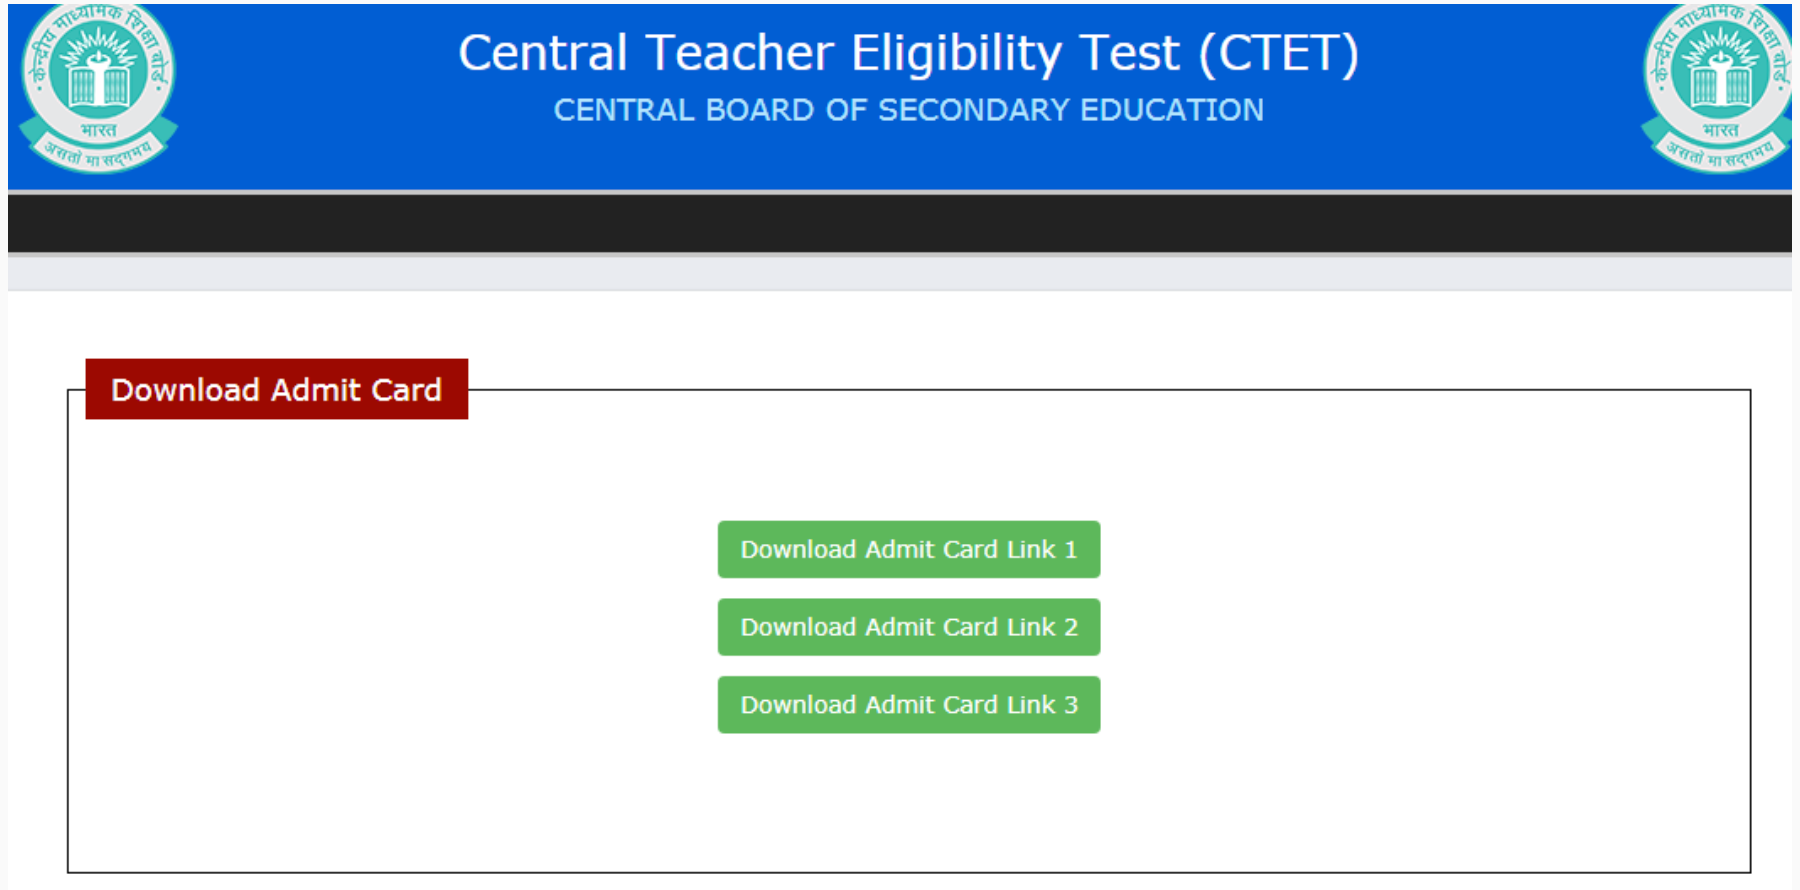 Select the link "Download Admit Card Link